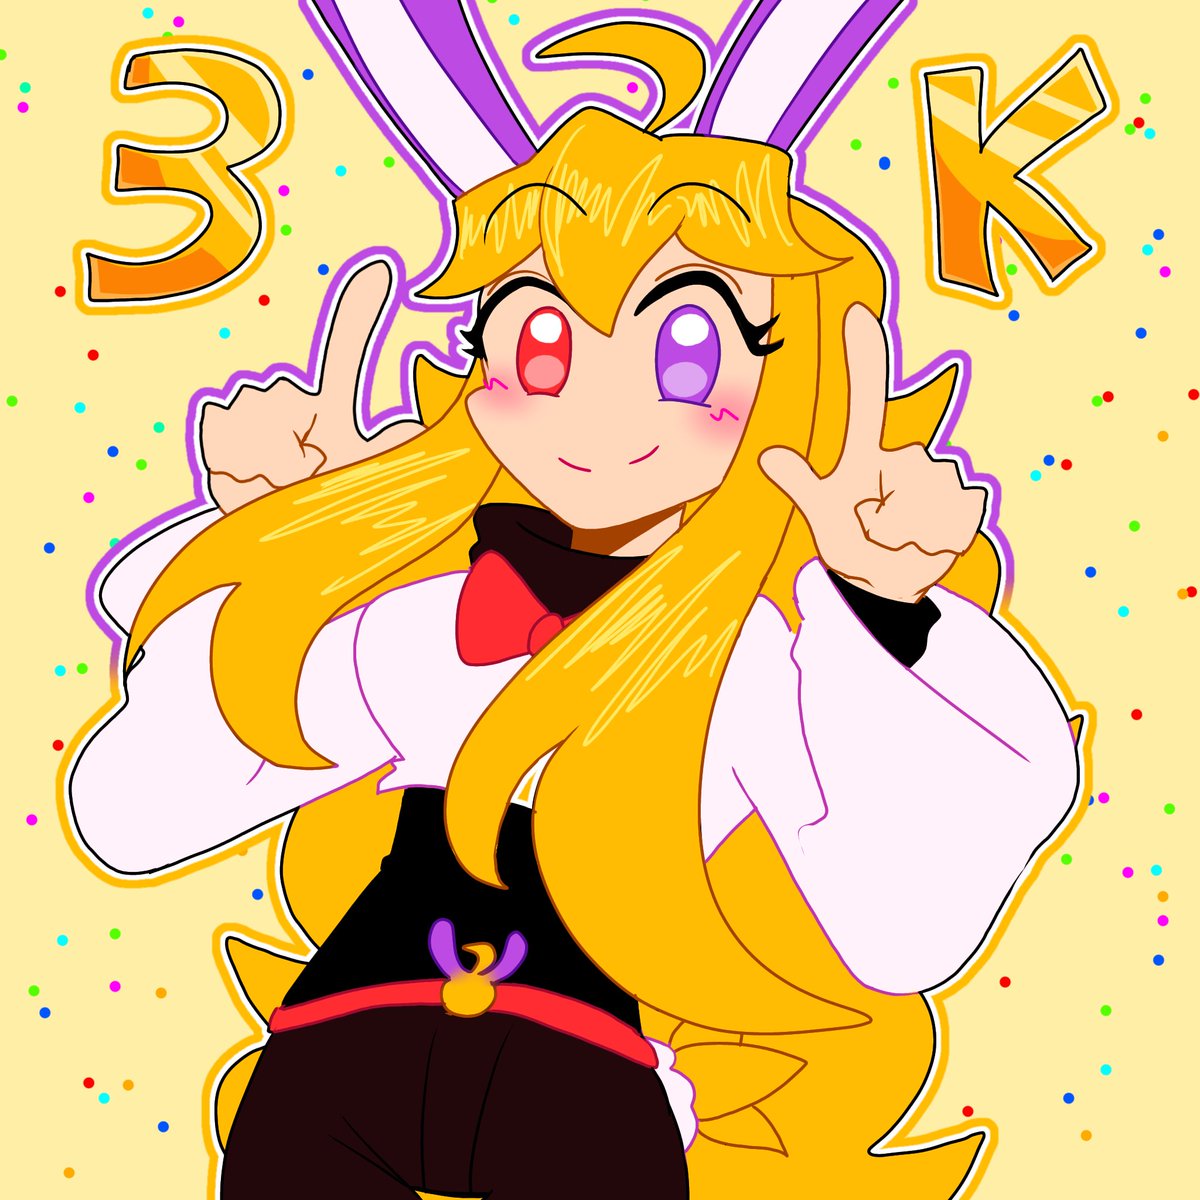 THANK YALL FOR 3K FOLLOWERS!!!!